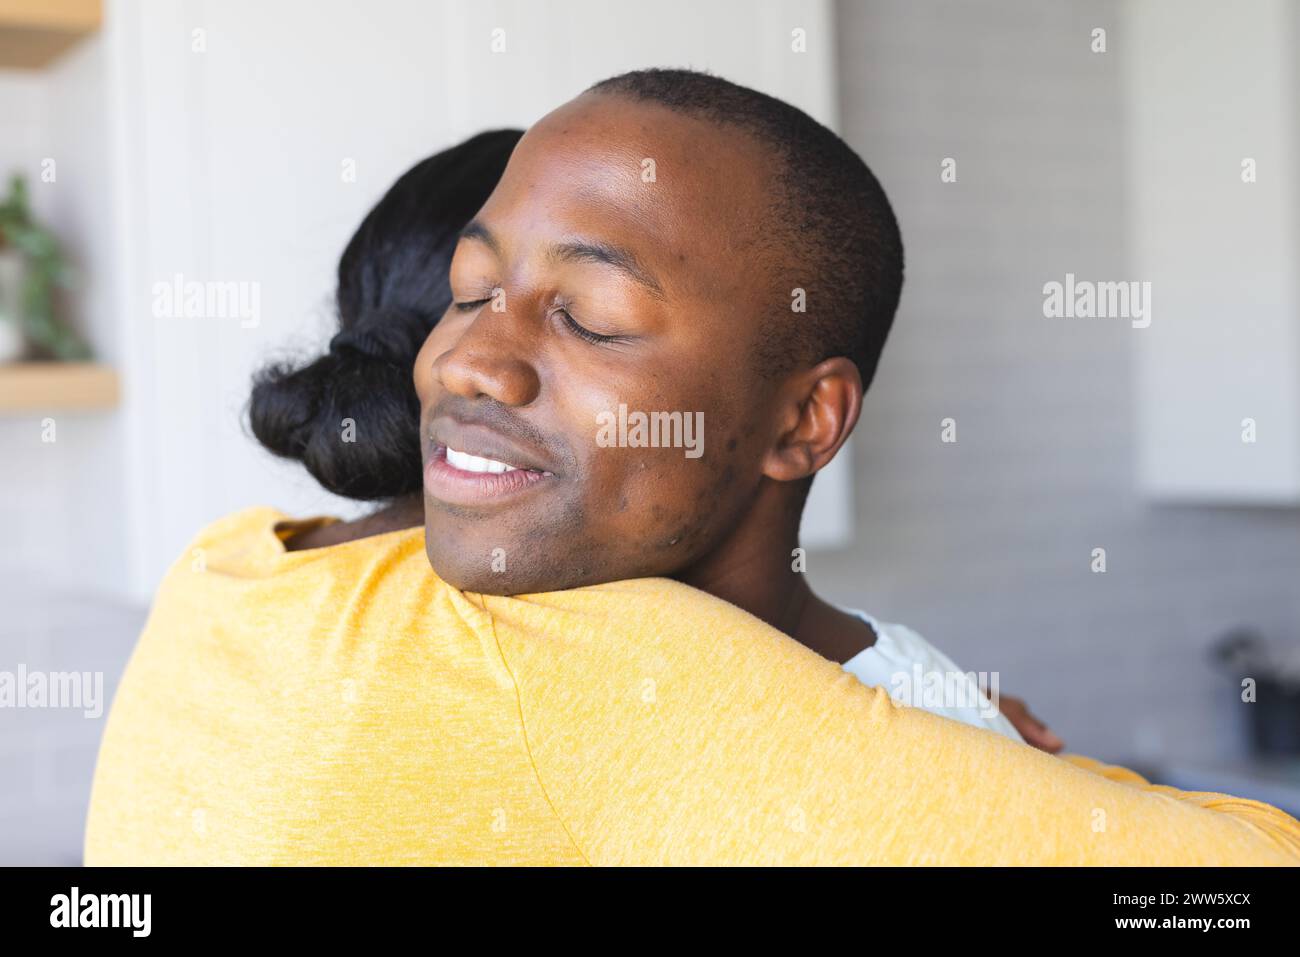 African American couple shares a warm embrace at home in the kitchen Stock Photo